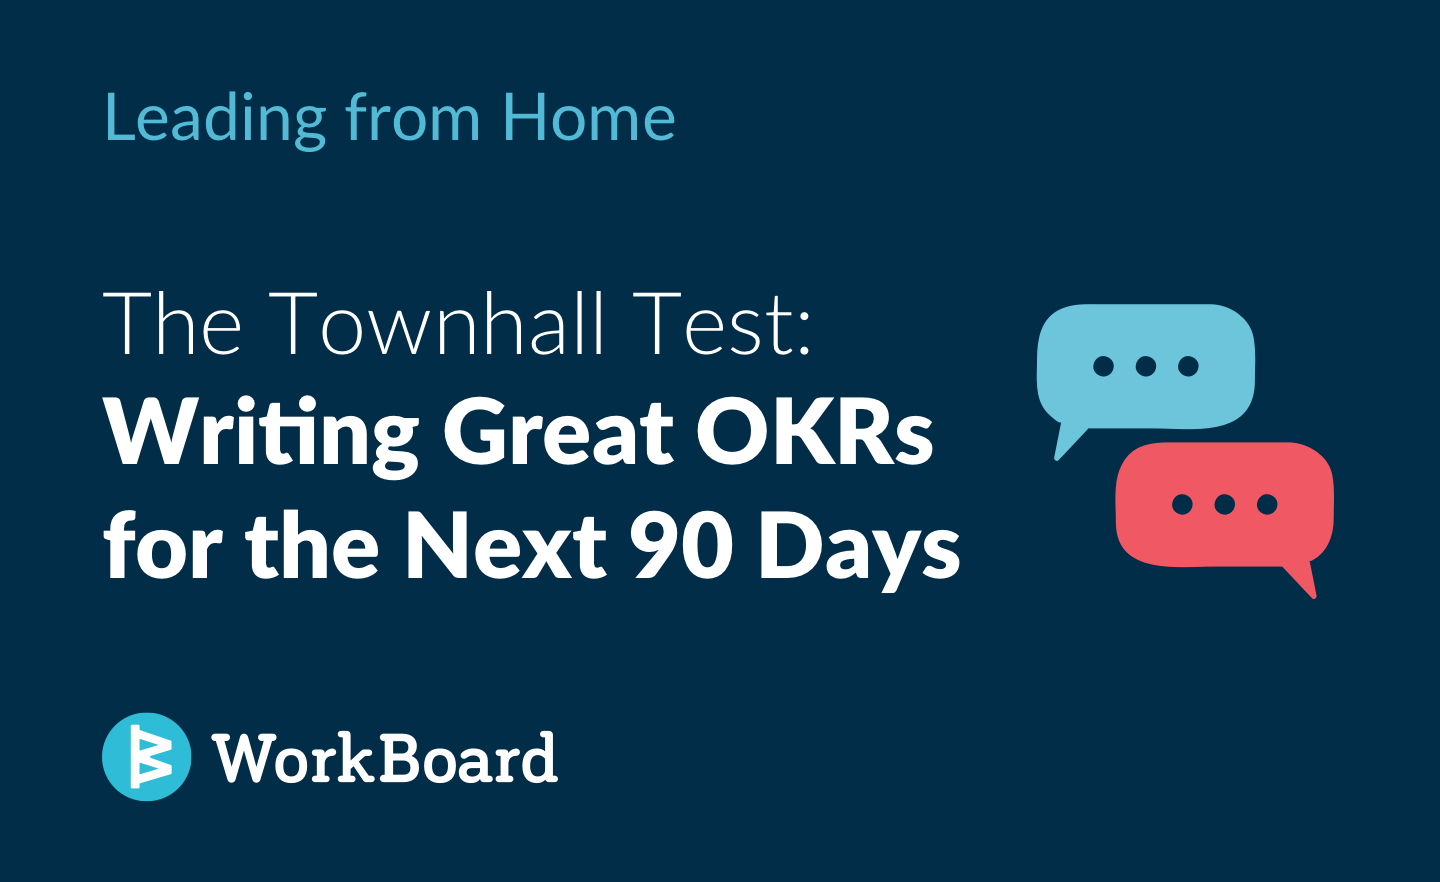 Blog Post: The Townhall Test: Writing Great OKRs for the Next 90 Days